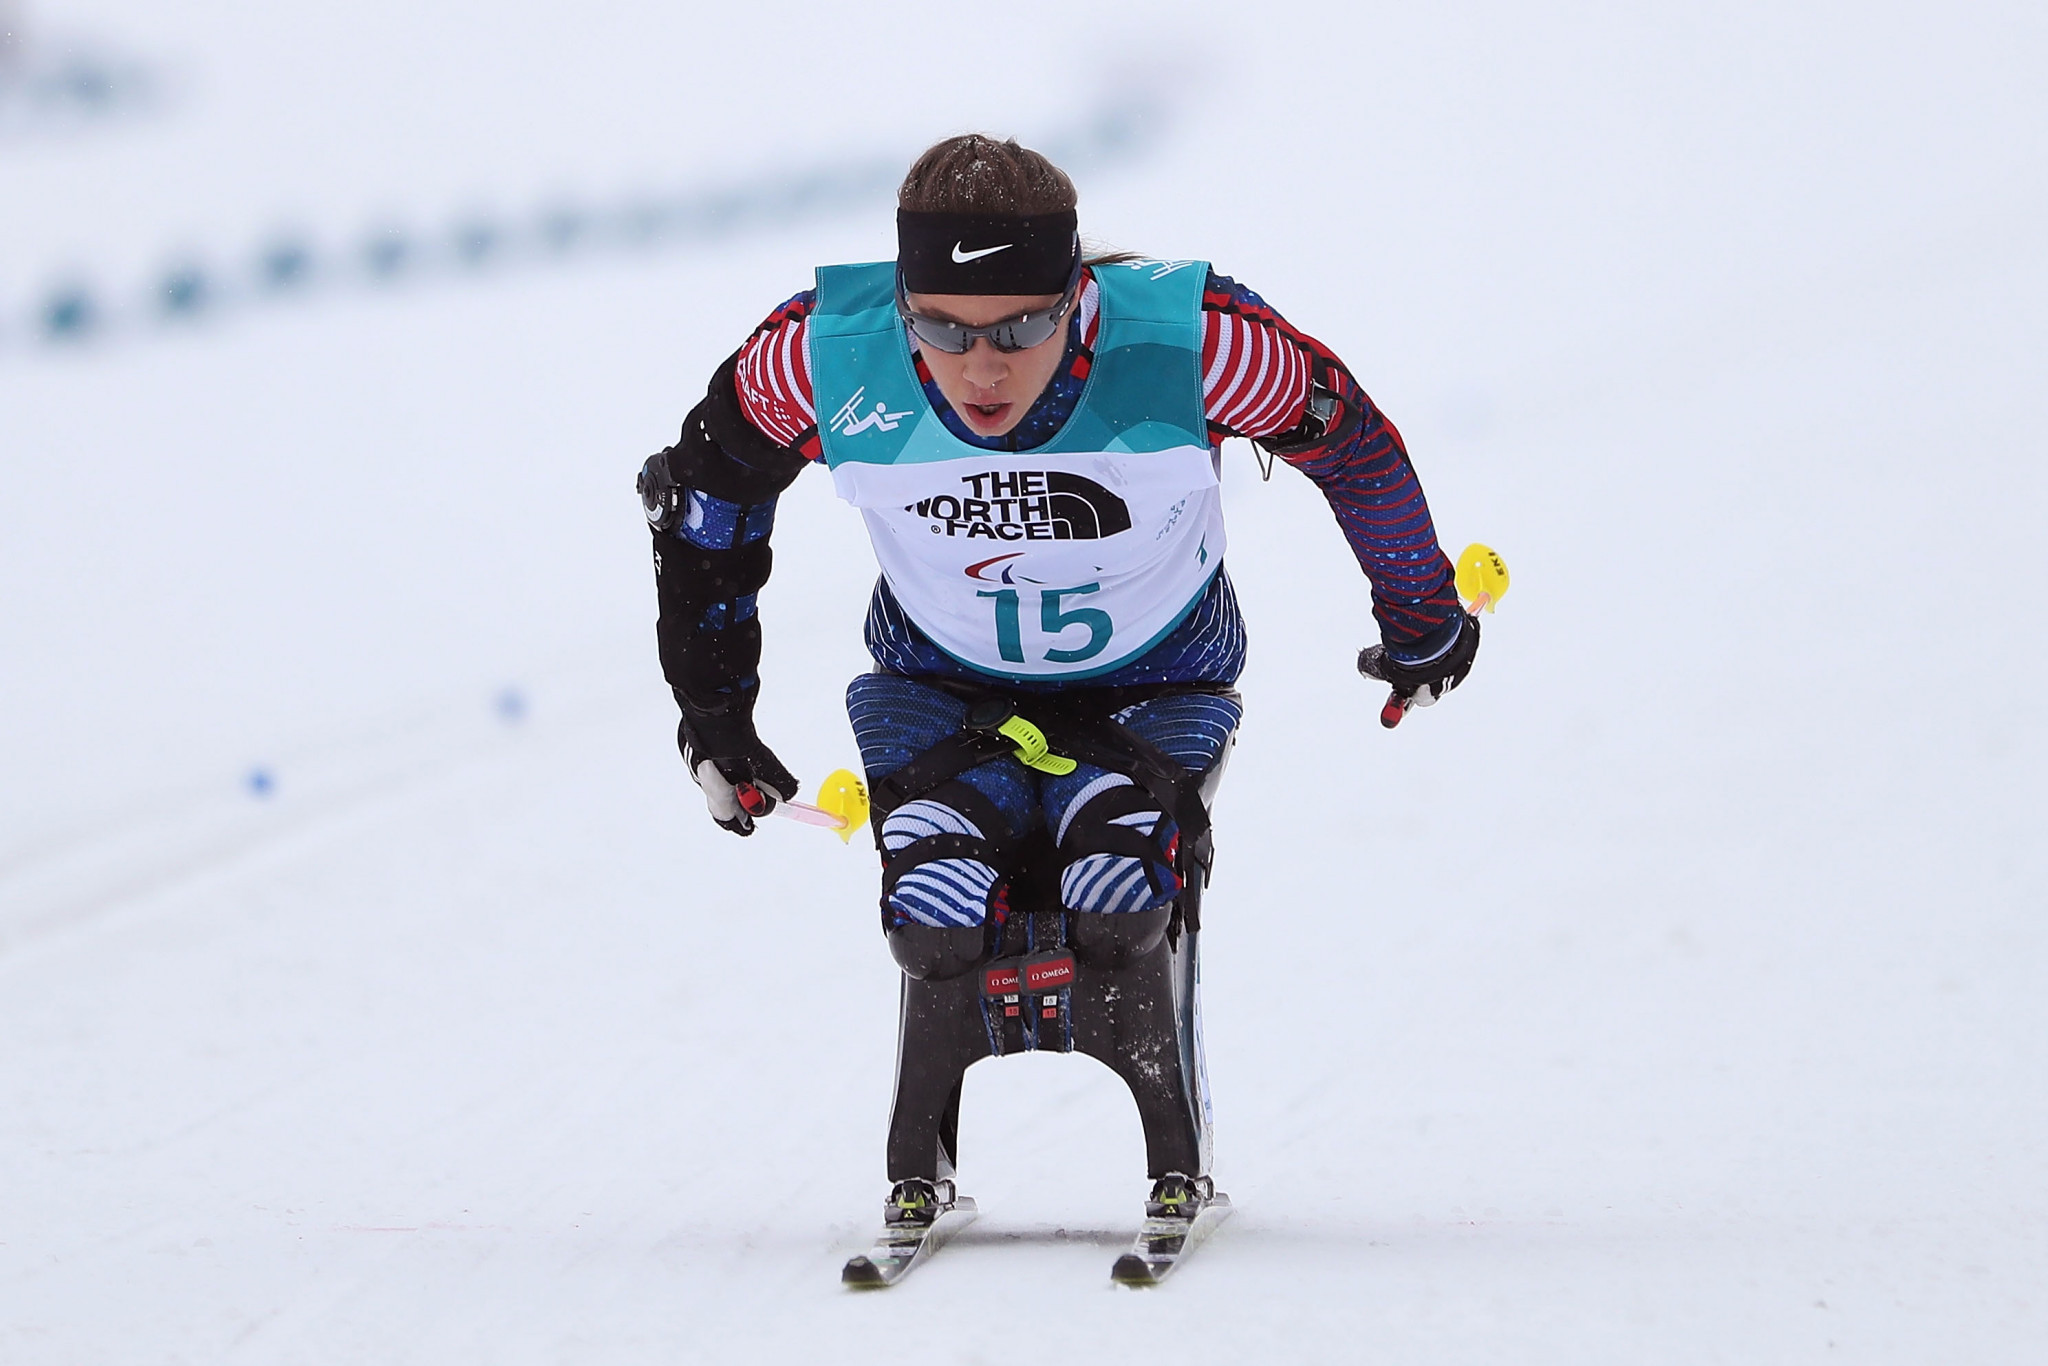 Masters and Lekomtsev finish undefeated at World Para Nordic Skiing World Cup in Planica